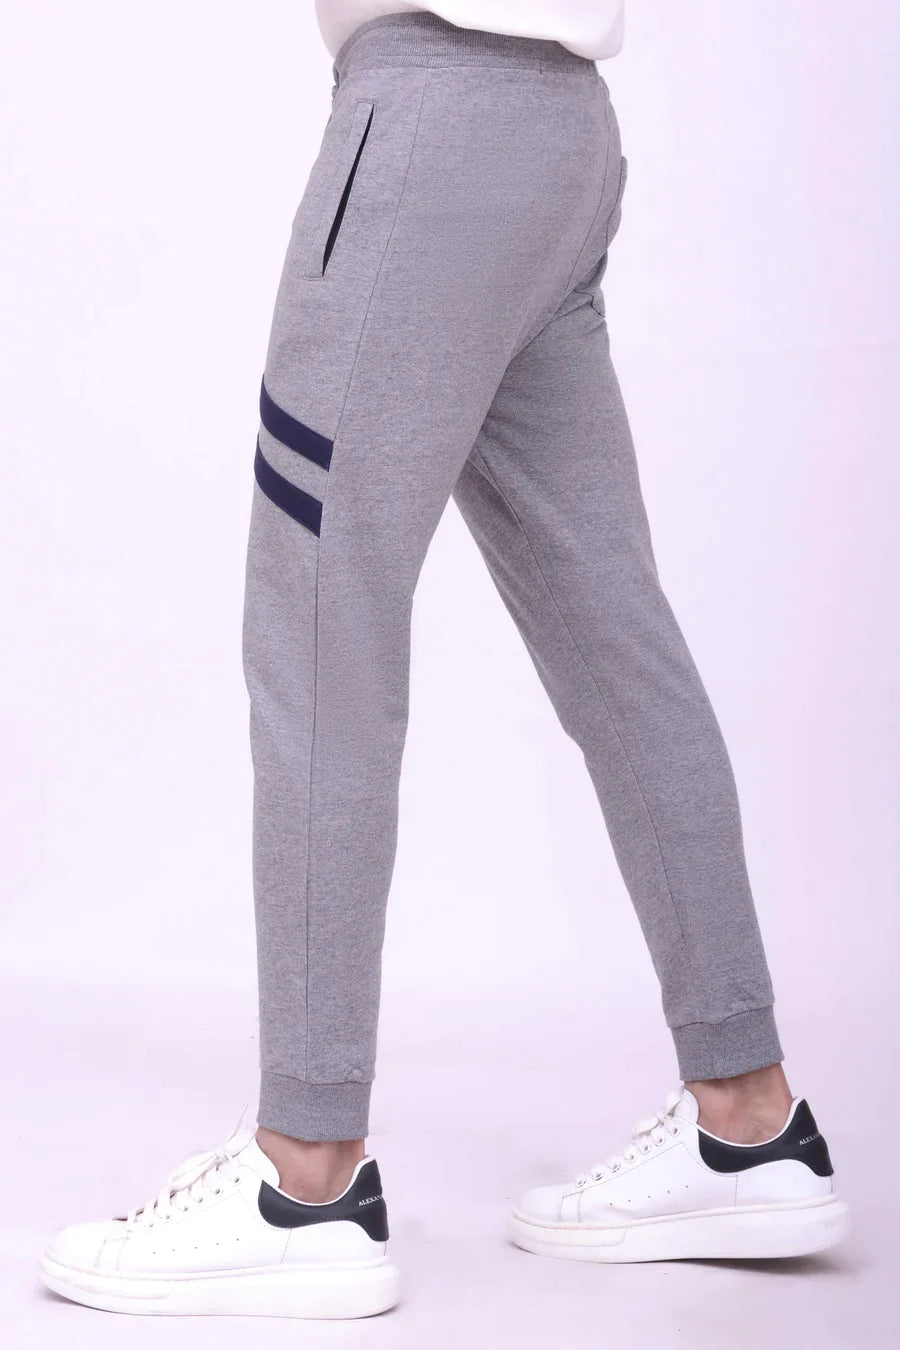 Casual Trousers For Men | Buy Men's Trousers in Pakistan at Charcoal Clothing